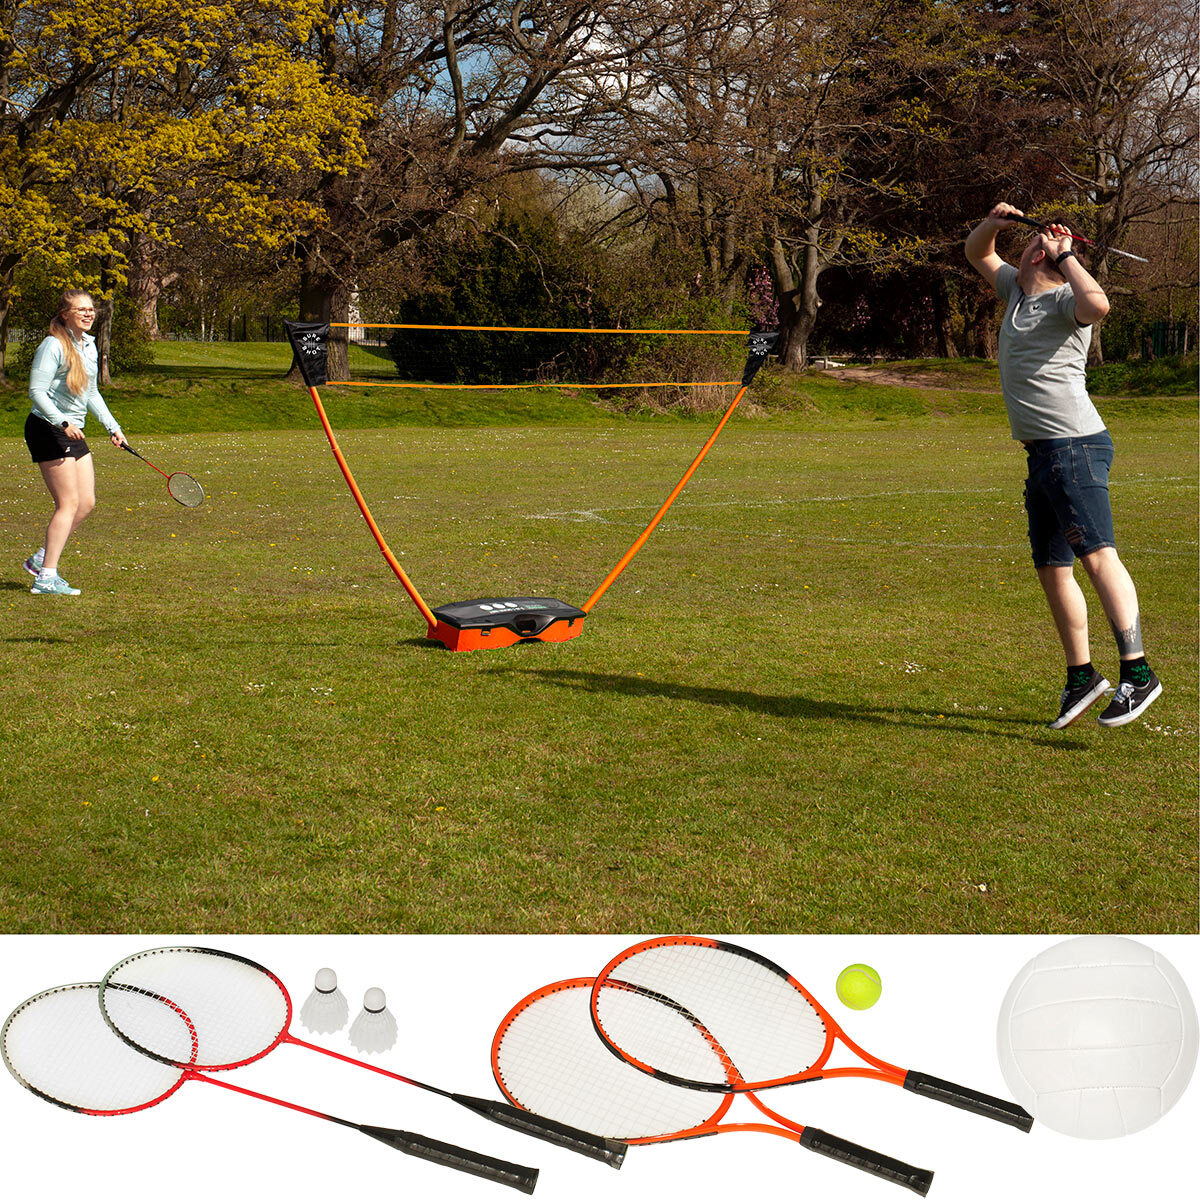 Sure Shot 3 in 1 Garden Set With Badminton, Tennis and Volleyball